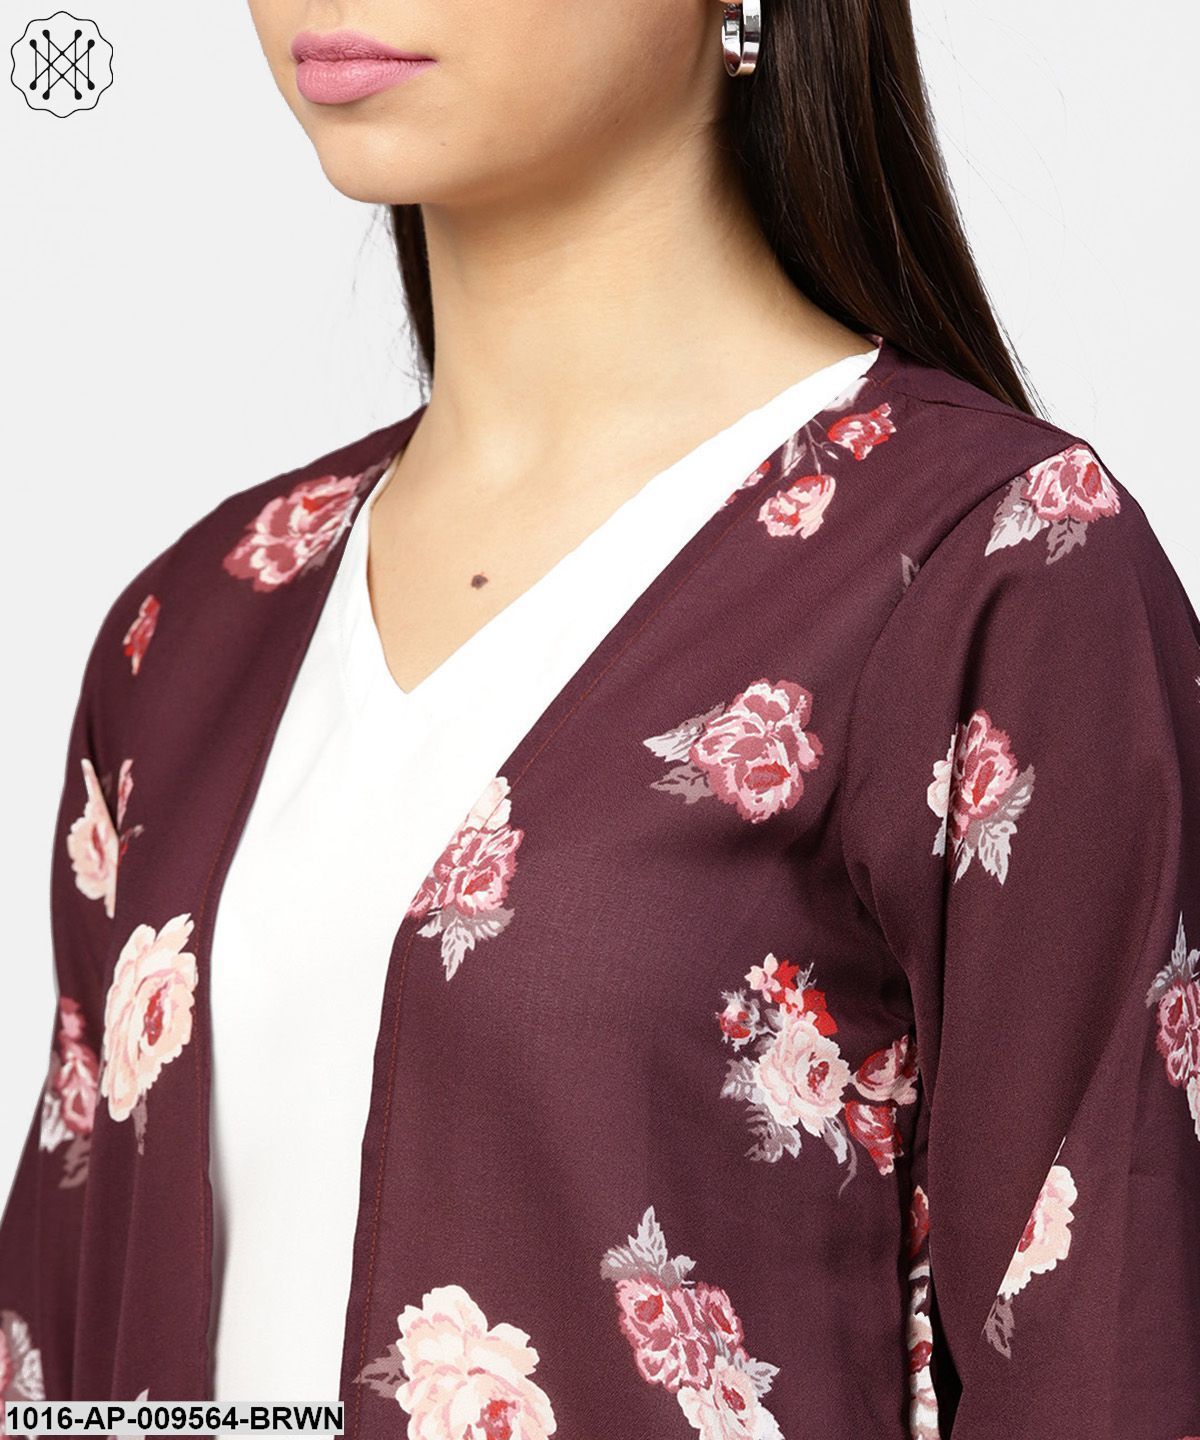 Solid V-Neck Cream Top With Floral Printed Loose-Fit 3/4Th Sleeves Open Style Cape